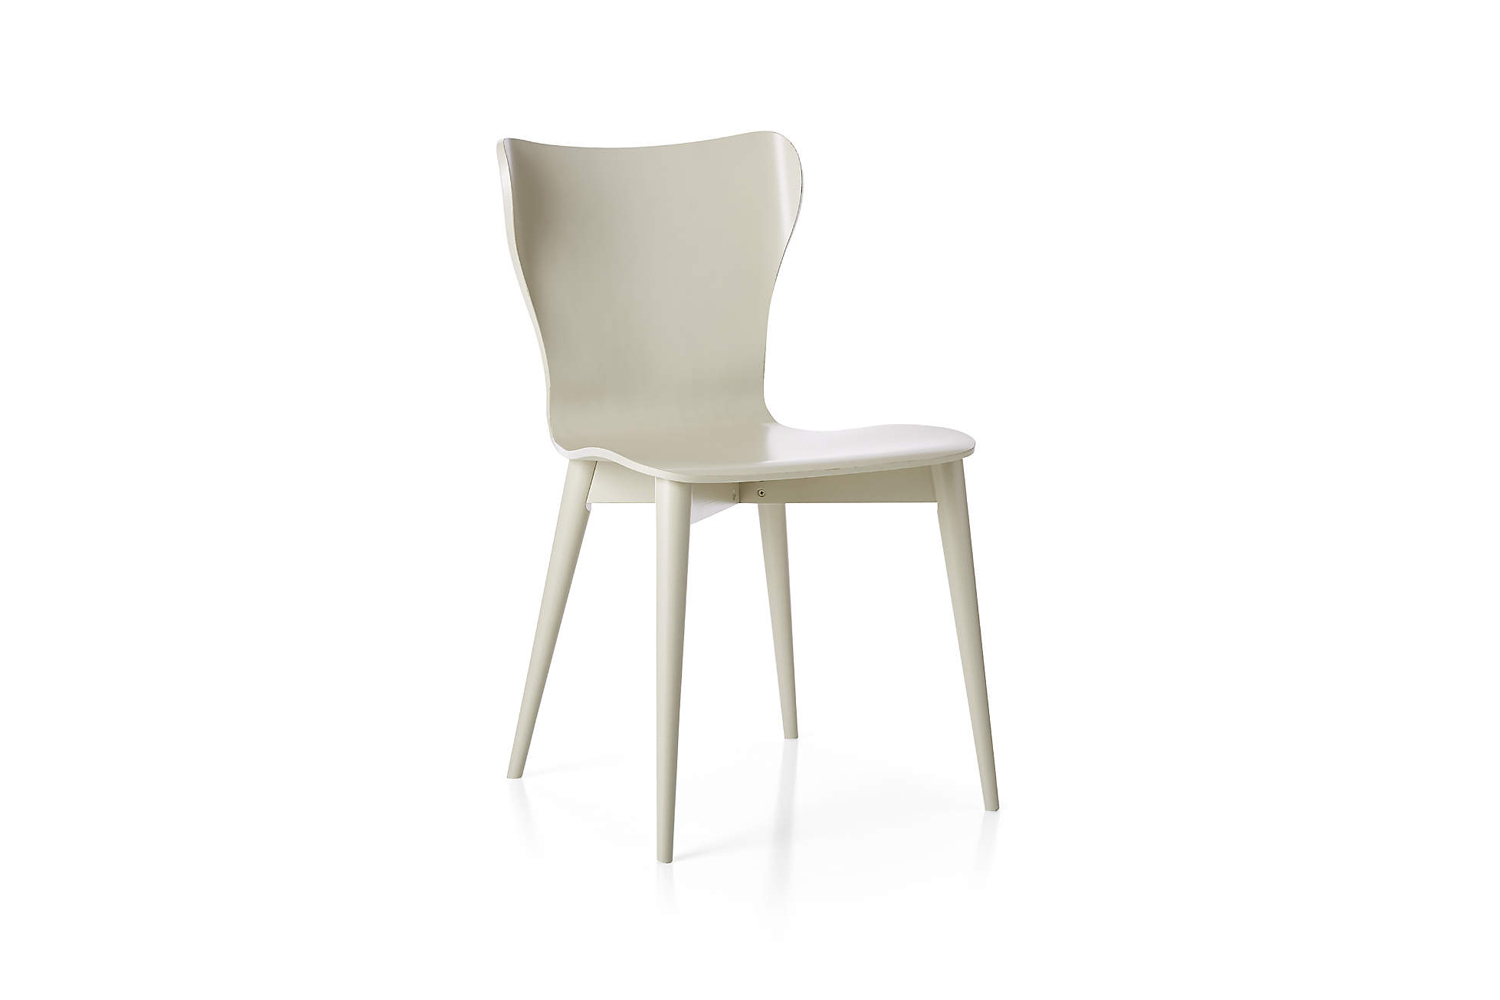 the brera vamelie bentwood dining chair is \$\249 at crate & barrel. 12